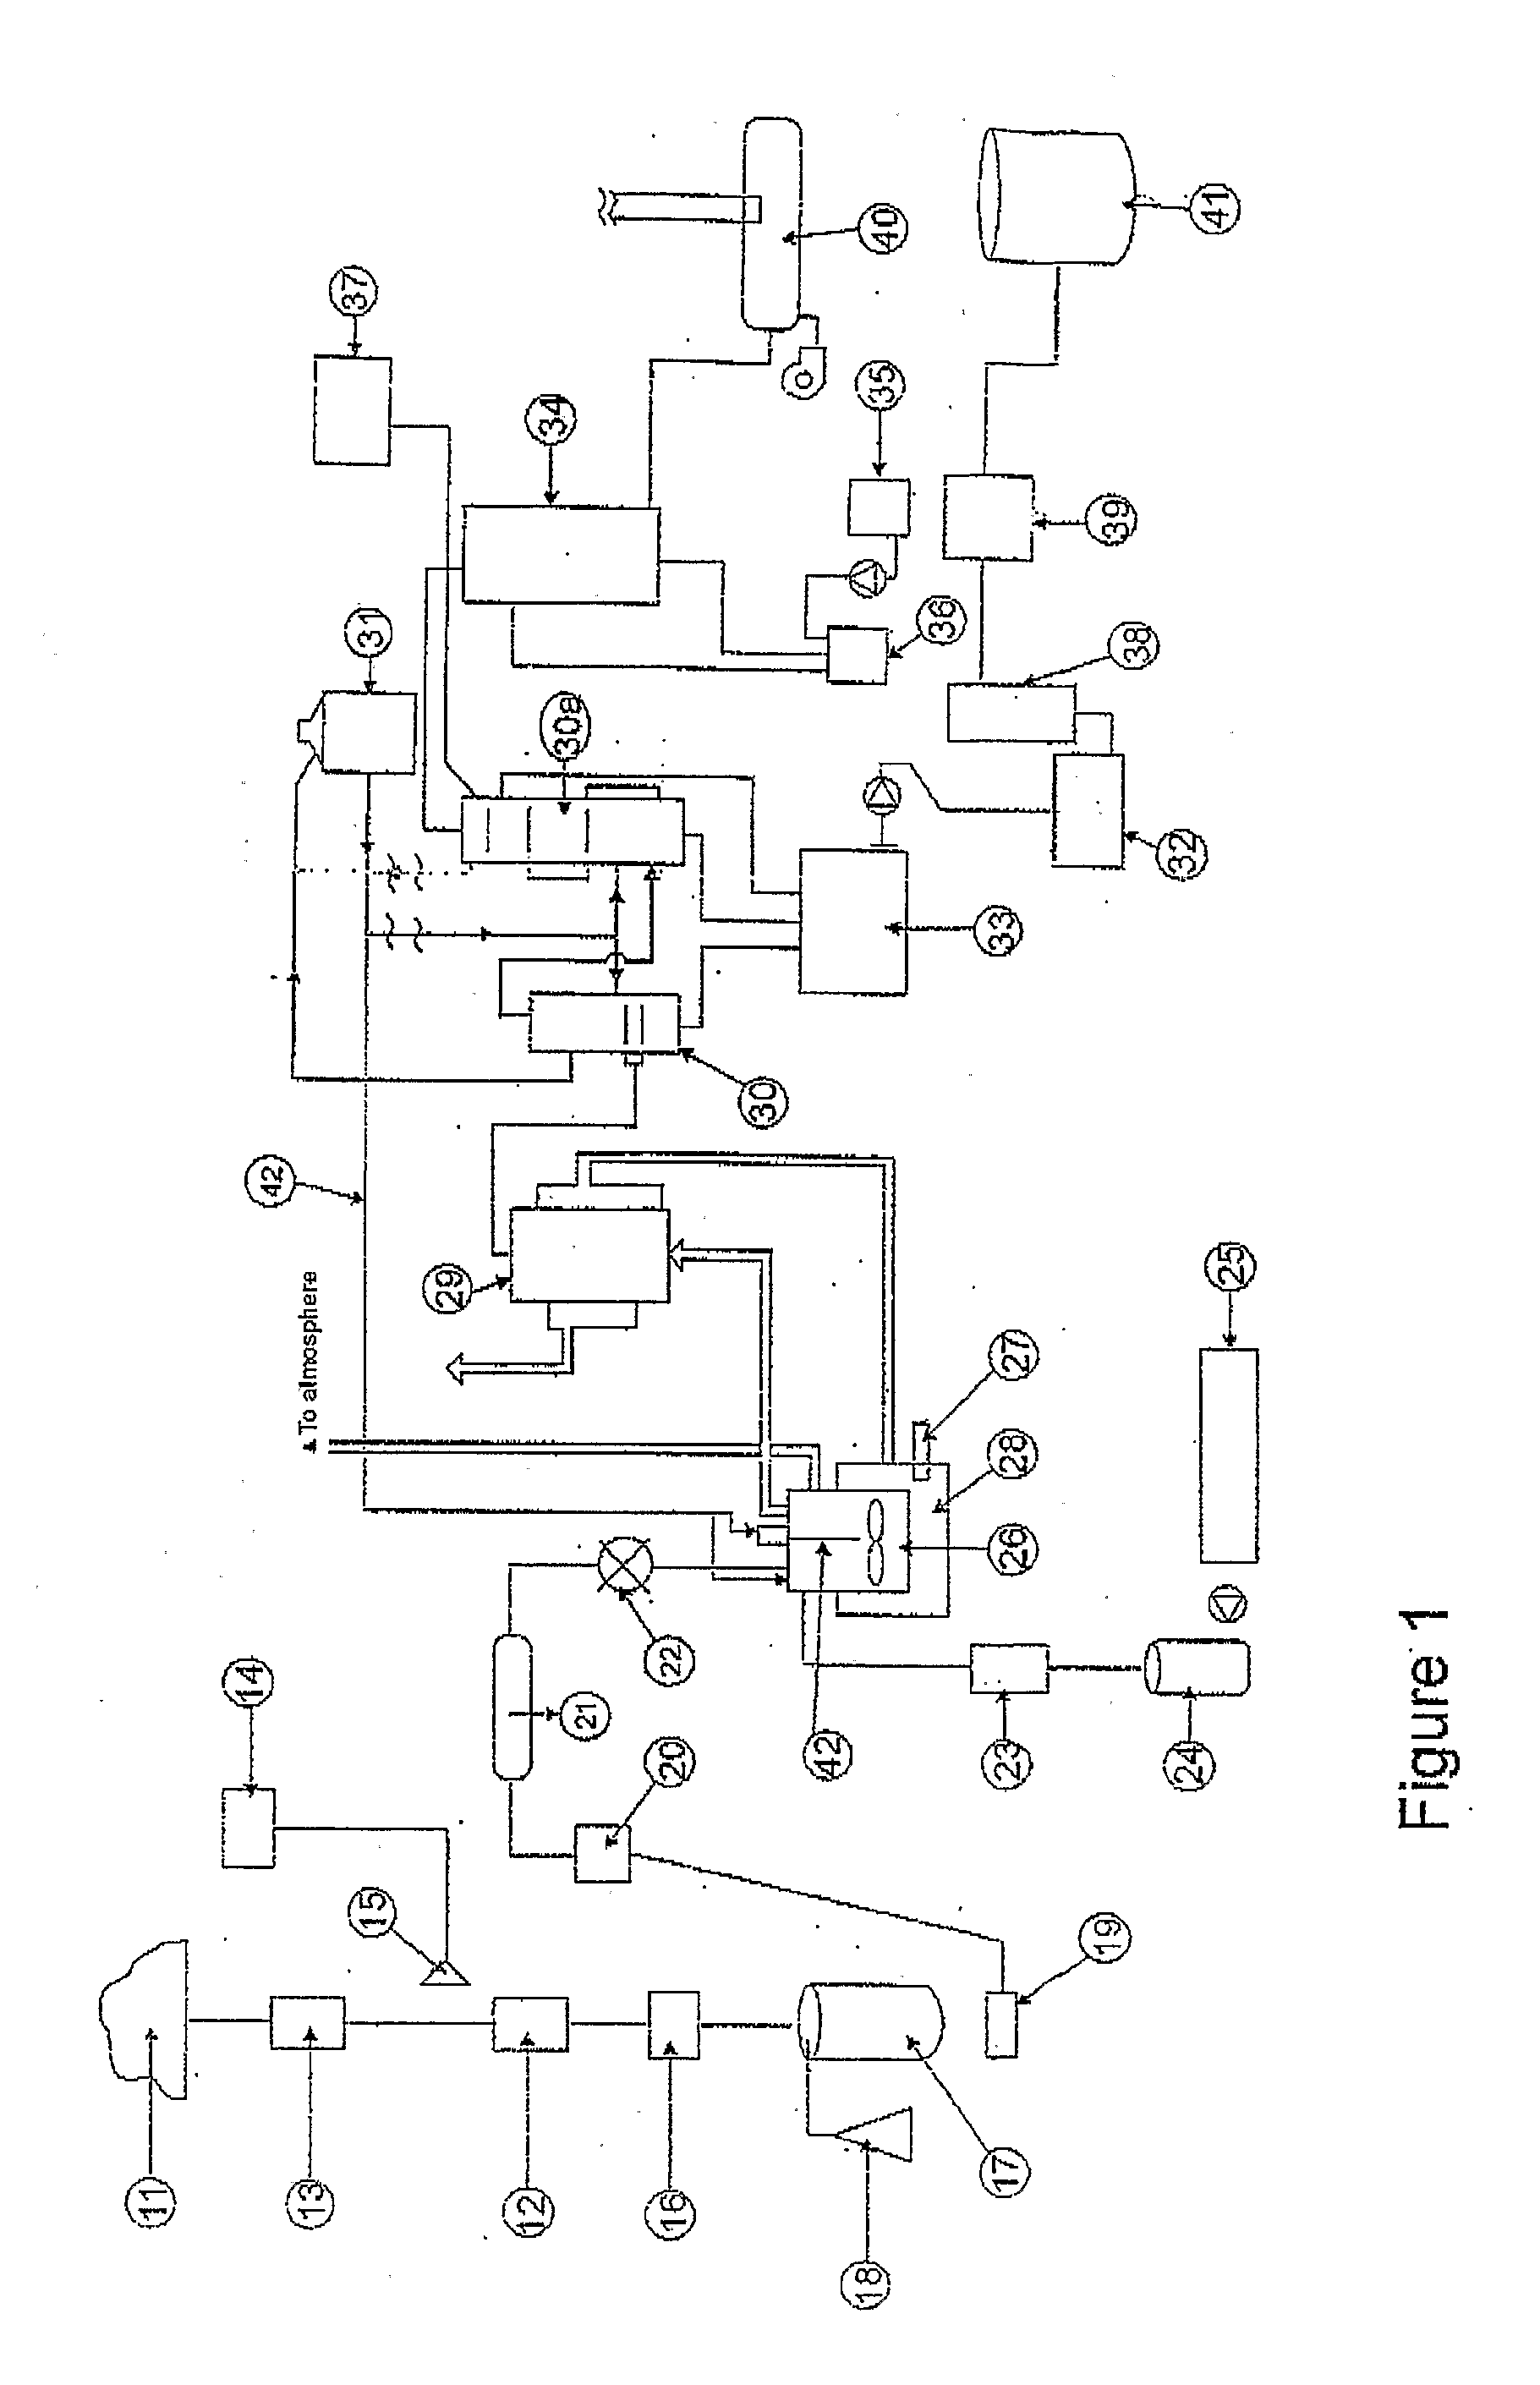 Process and plant for conversion of waste material to liquid fuel